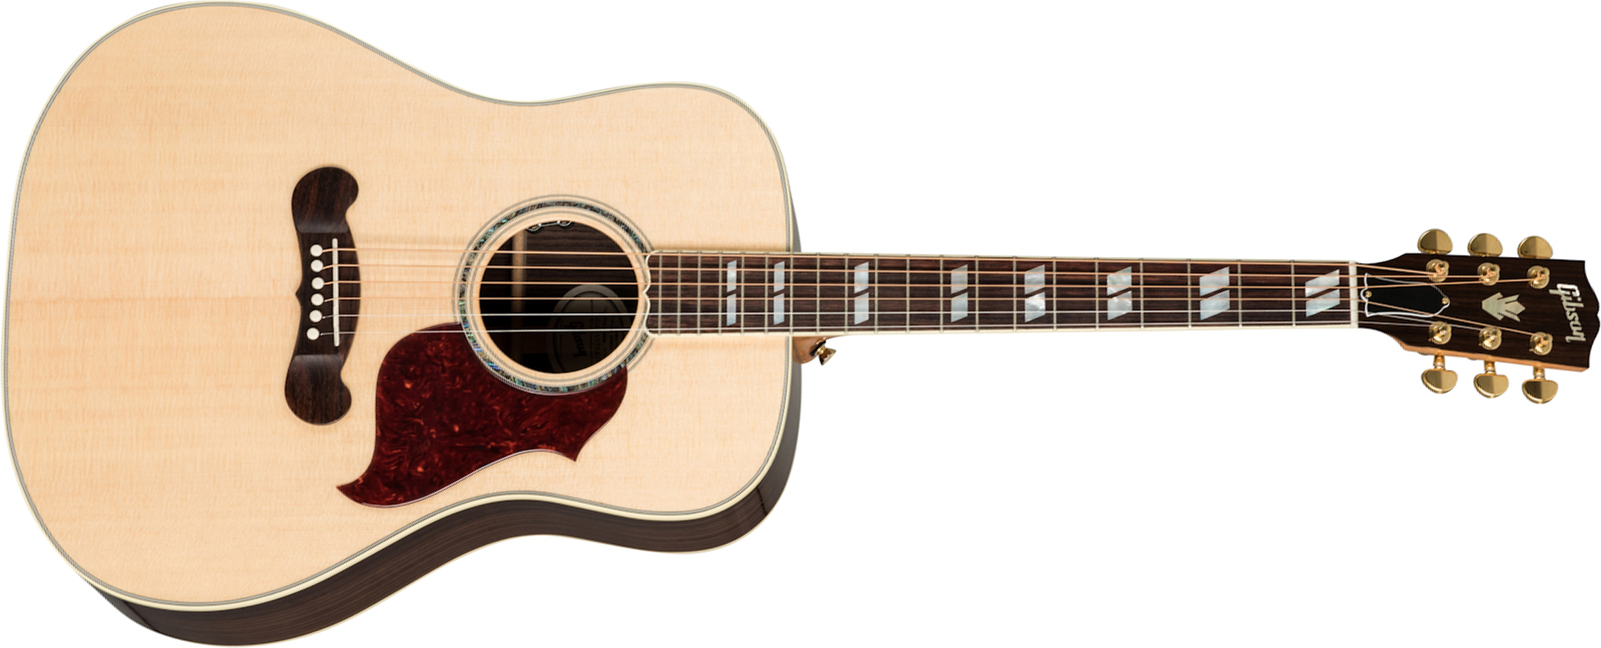 Gibson Songwriter Standard Rosewood 2019 Epicea Palissandre Rw - Antique Natural - Guitarra electro acustica - Main picture